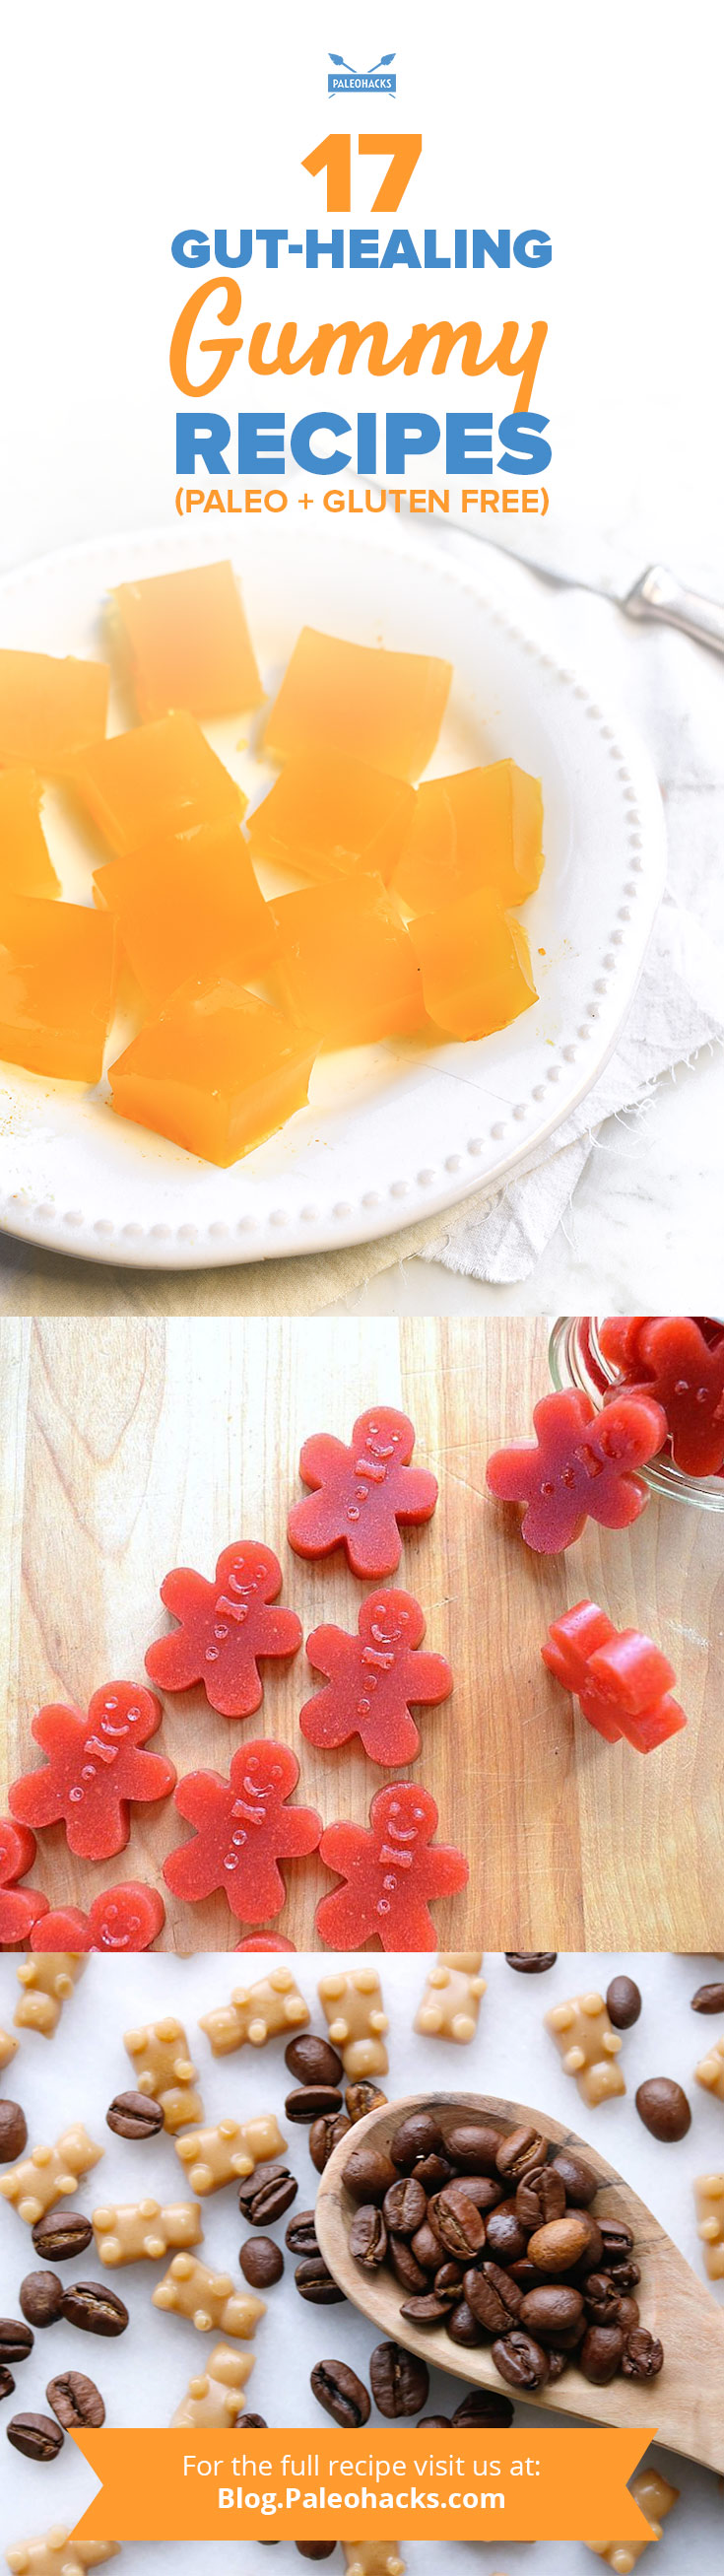 There are few Paleo foods that mimic candy, are totally kid-friendly, and offer major health and wellness benefits. These healthy gummy recipes fit the bill.